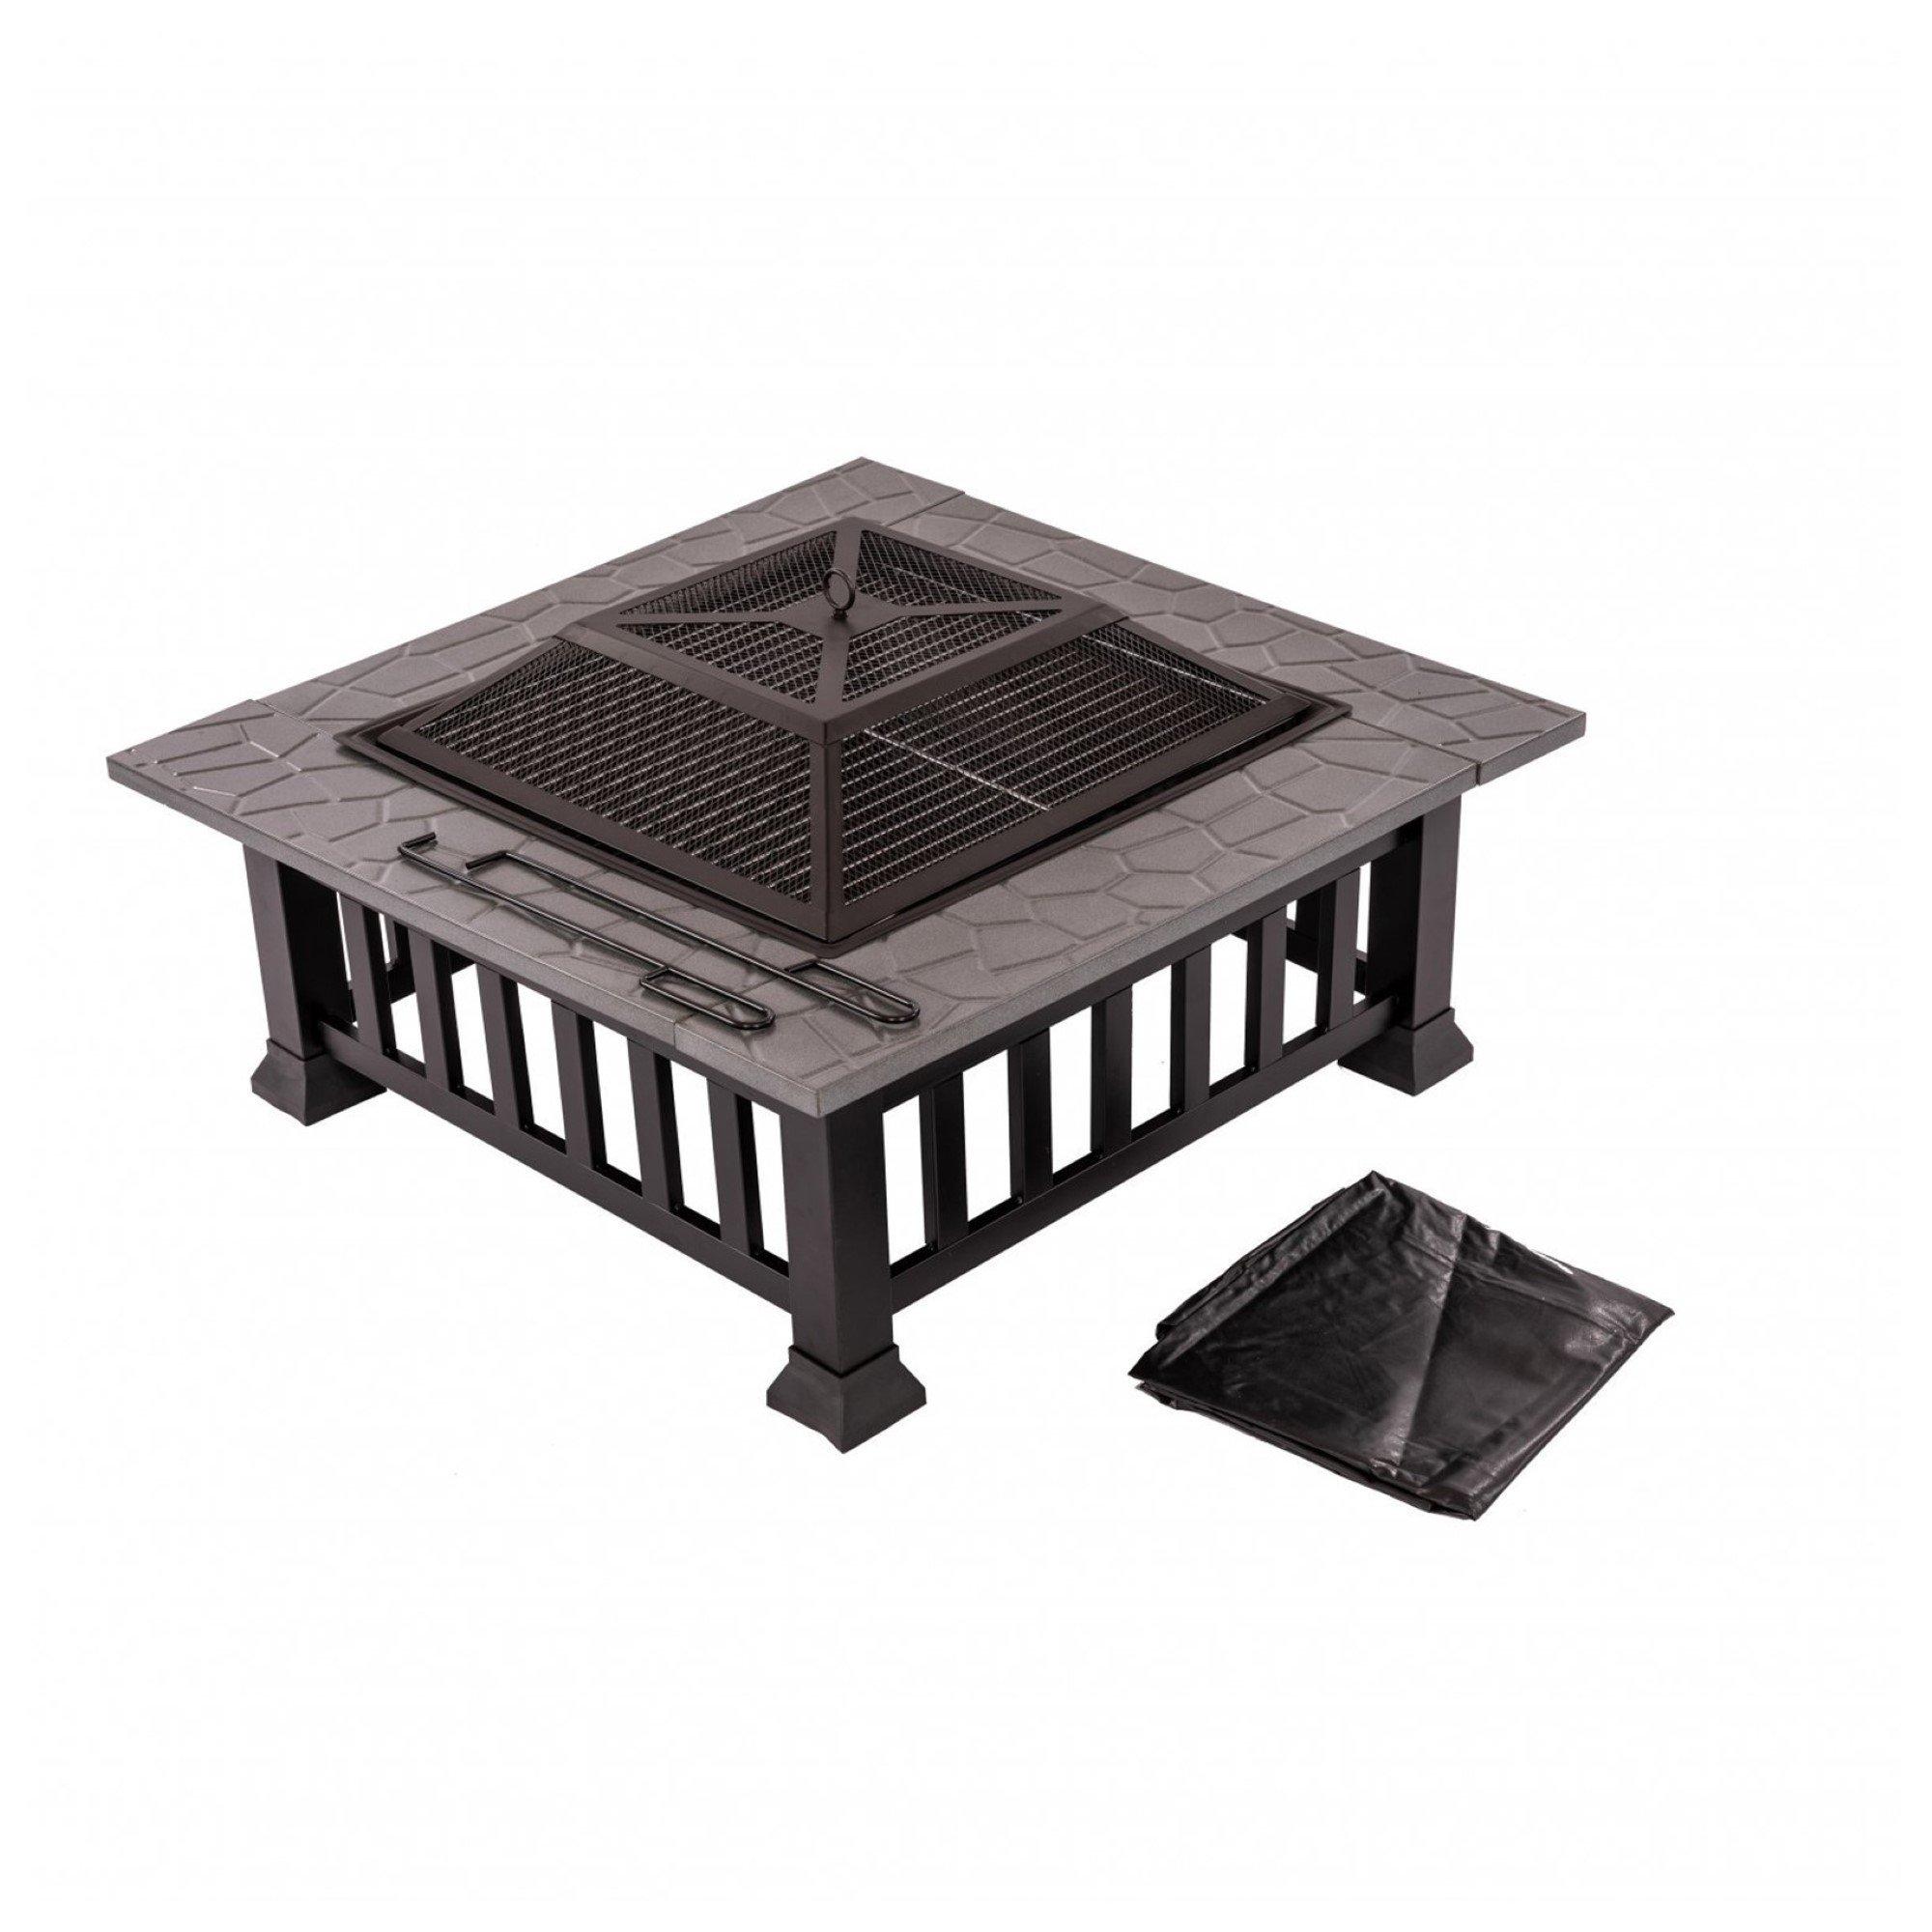 Firepit Table Outdoor Garden Patio Heater BBQ Grill with Cover